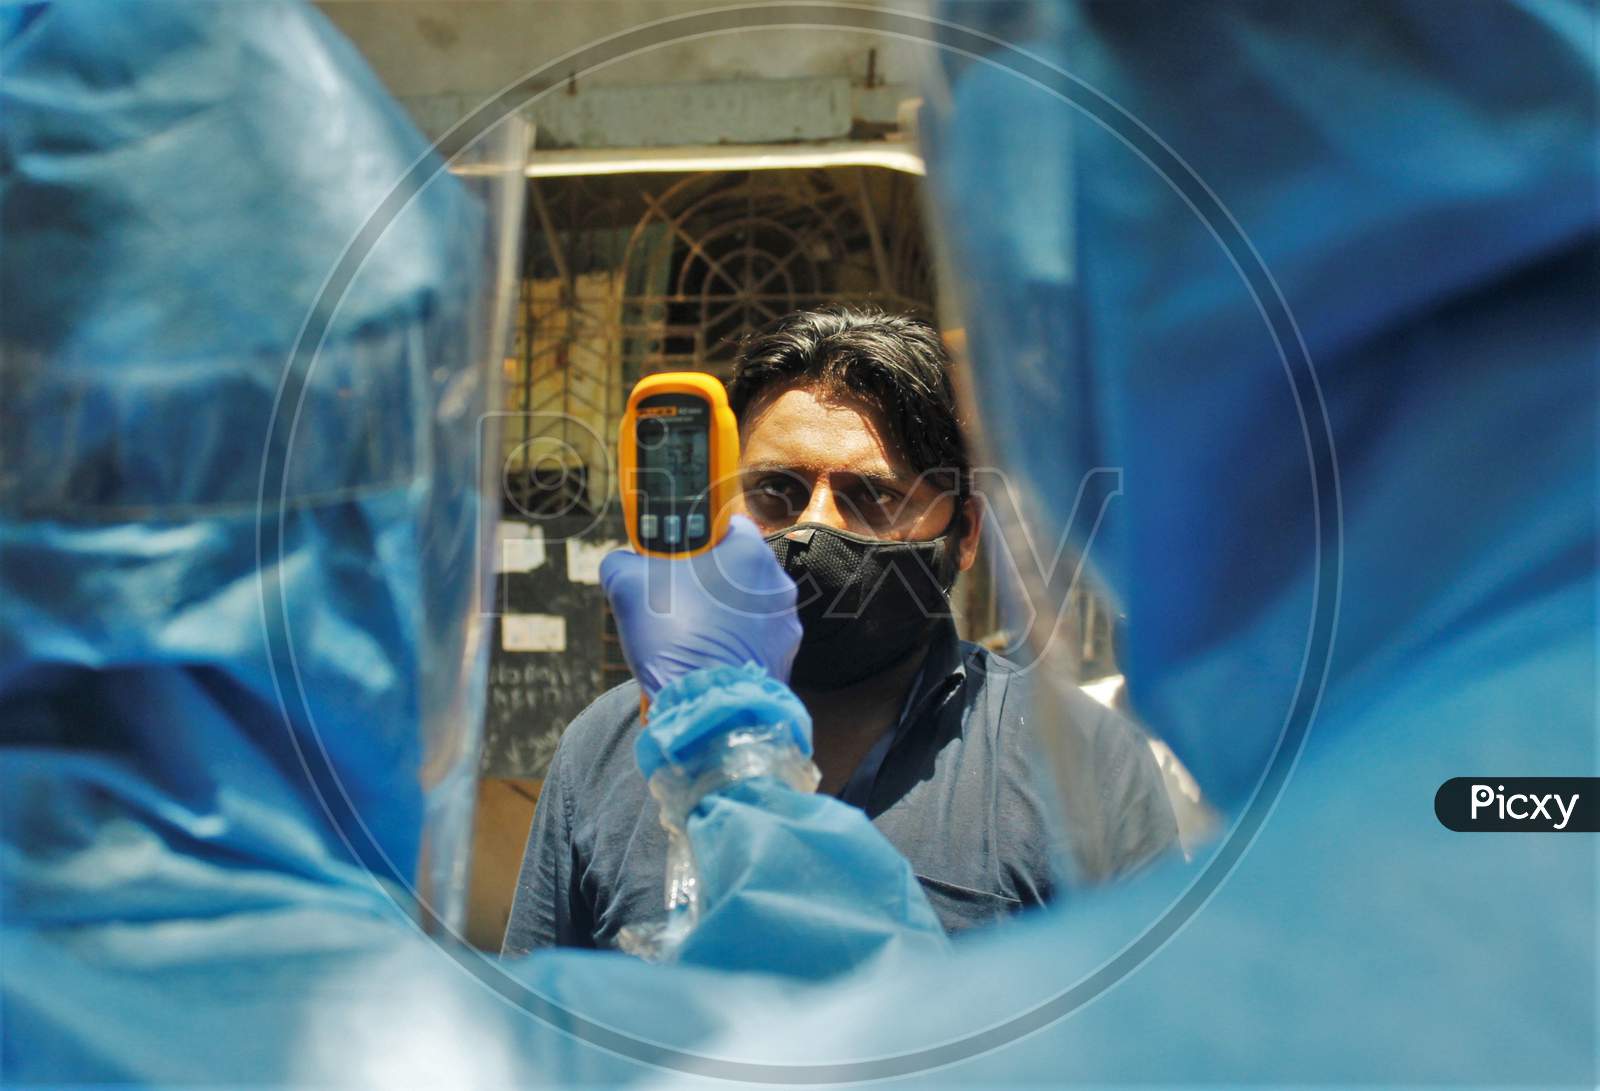 A doctor wearing protective suit scans residents from Dharavi, one of Asia's largest slums, with an infrared thermometer to check their temperature as a precautionary measure against the spread of the coronavirus disease (COVID-19), in Mumbai, India, April 12, 2020.